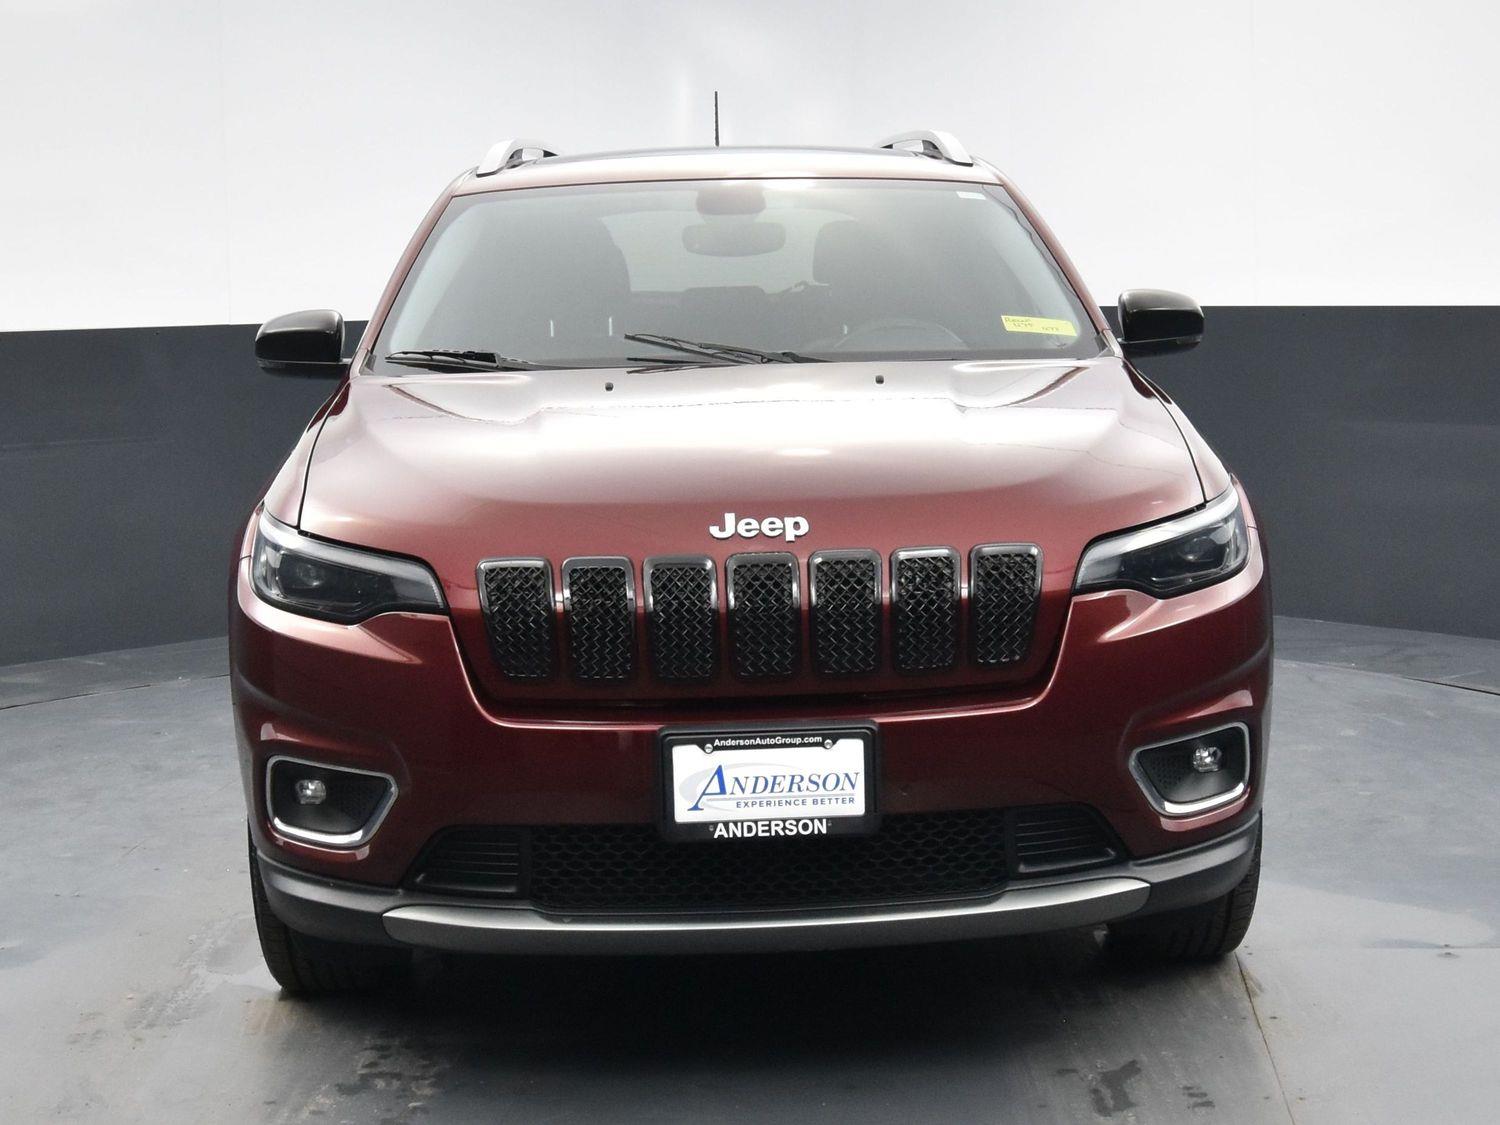 Used 2019 Jeep Cherokee Limited Sport Utility for sale in Grand Island NE